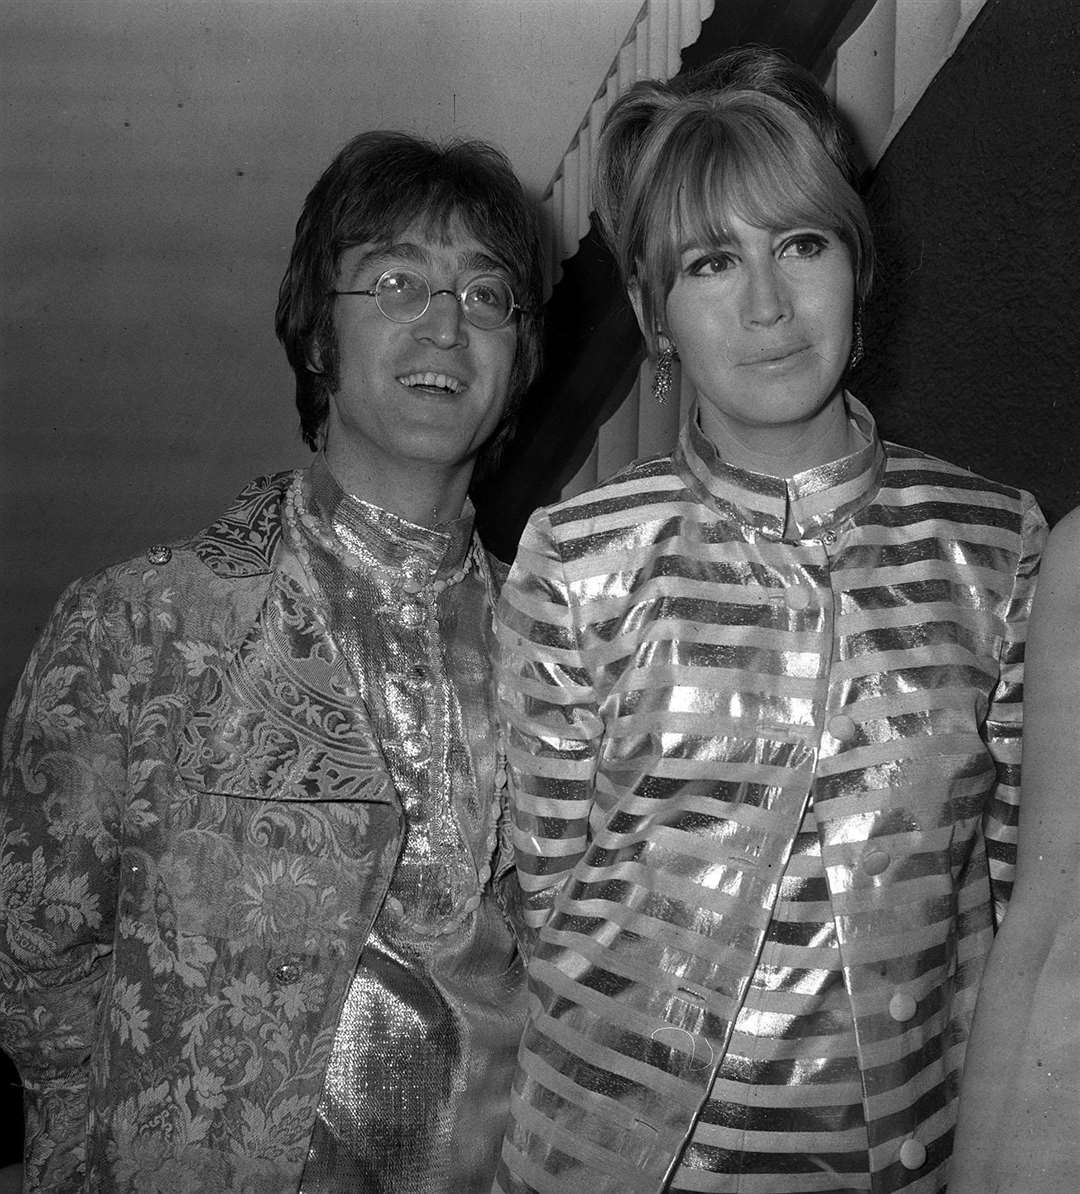 John Lennon with his then wife Cynthia Lennon at Heathrow Airport in 1968 (PA)